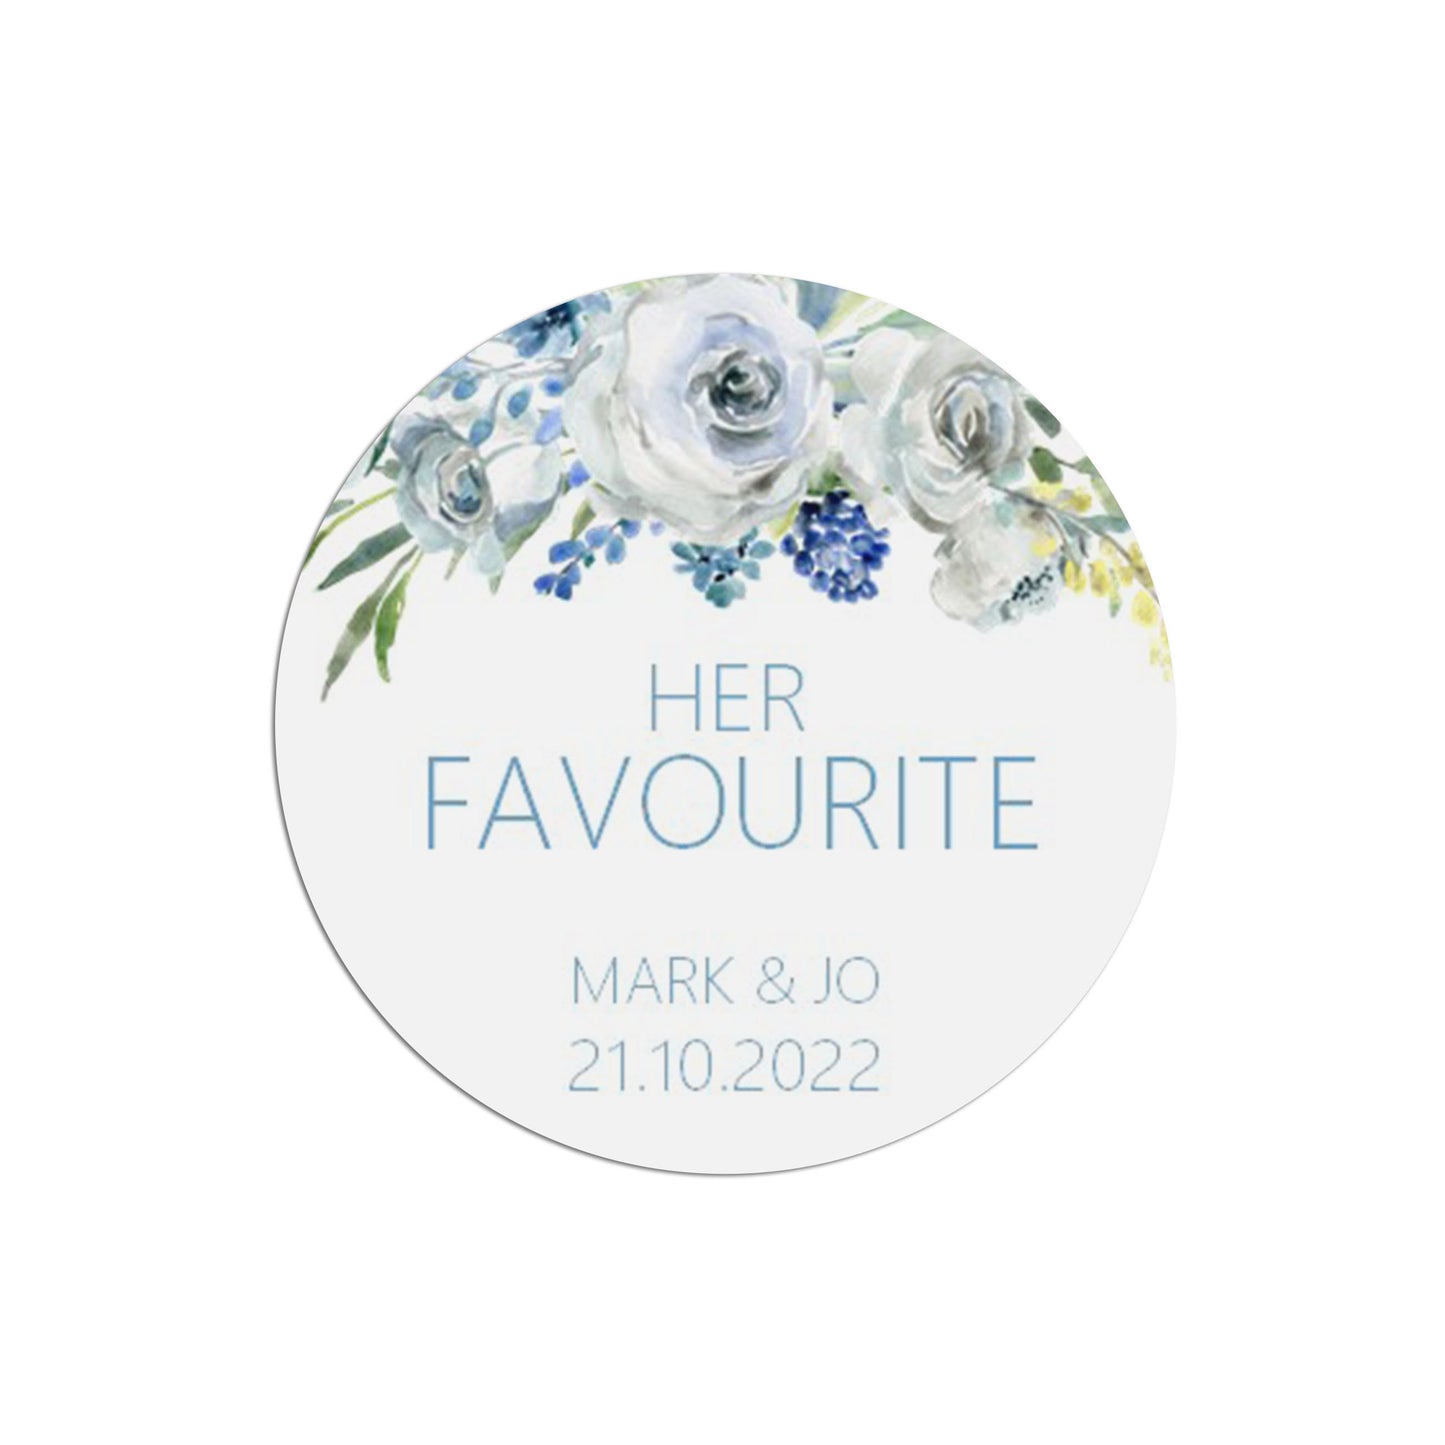 Her Favourite Wedding Stickers - Blue Floral